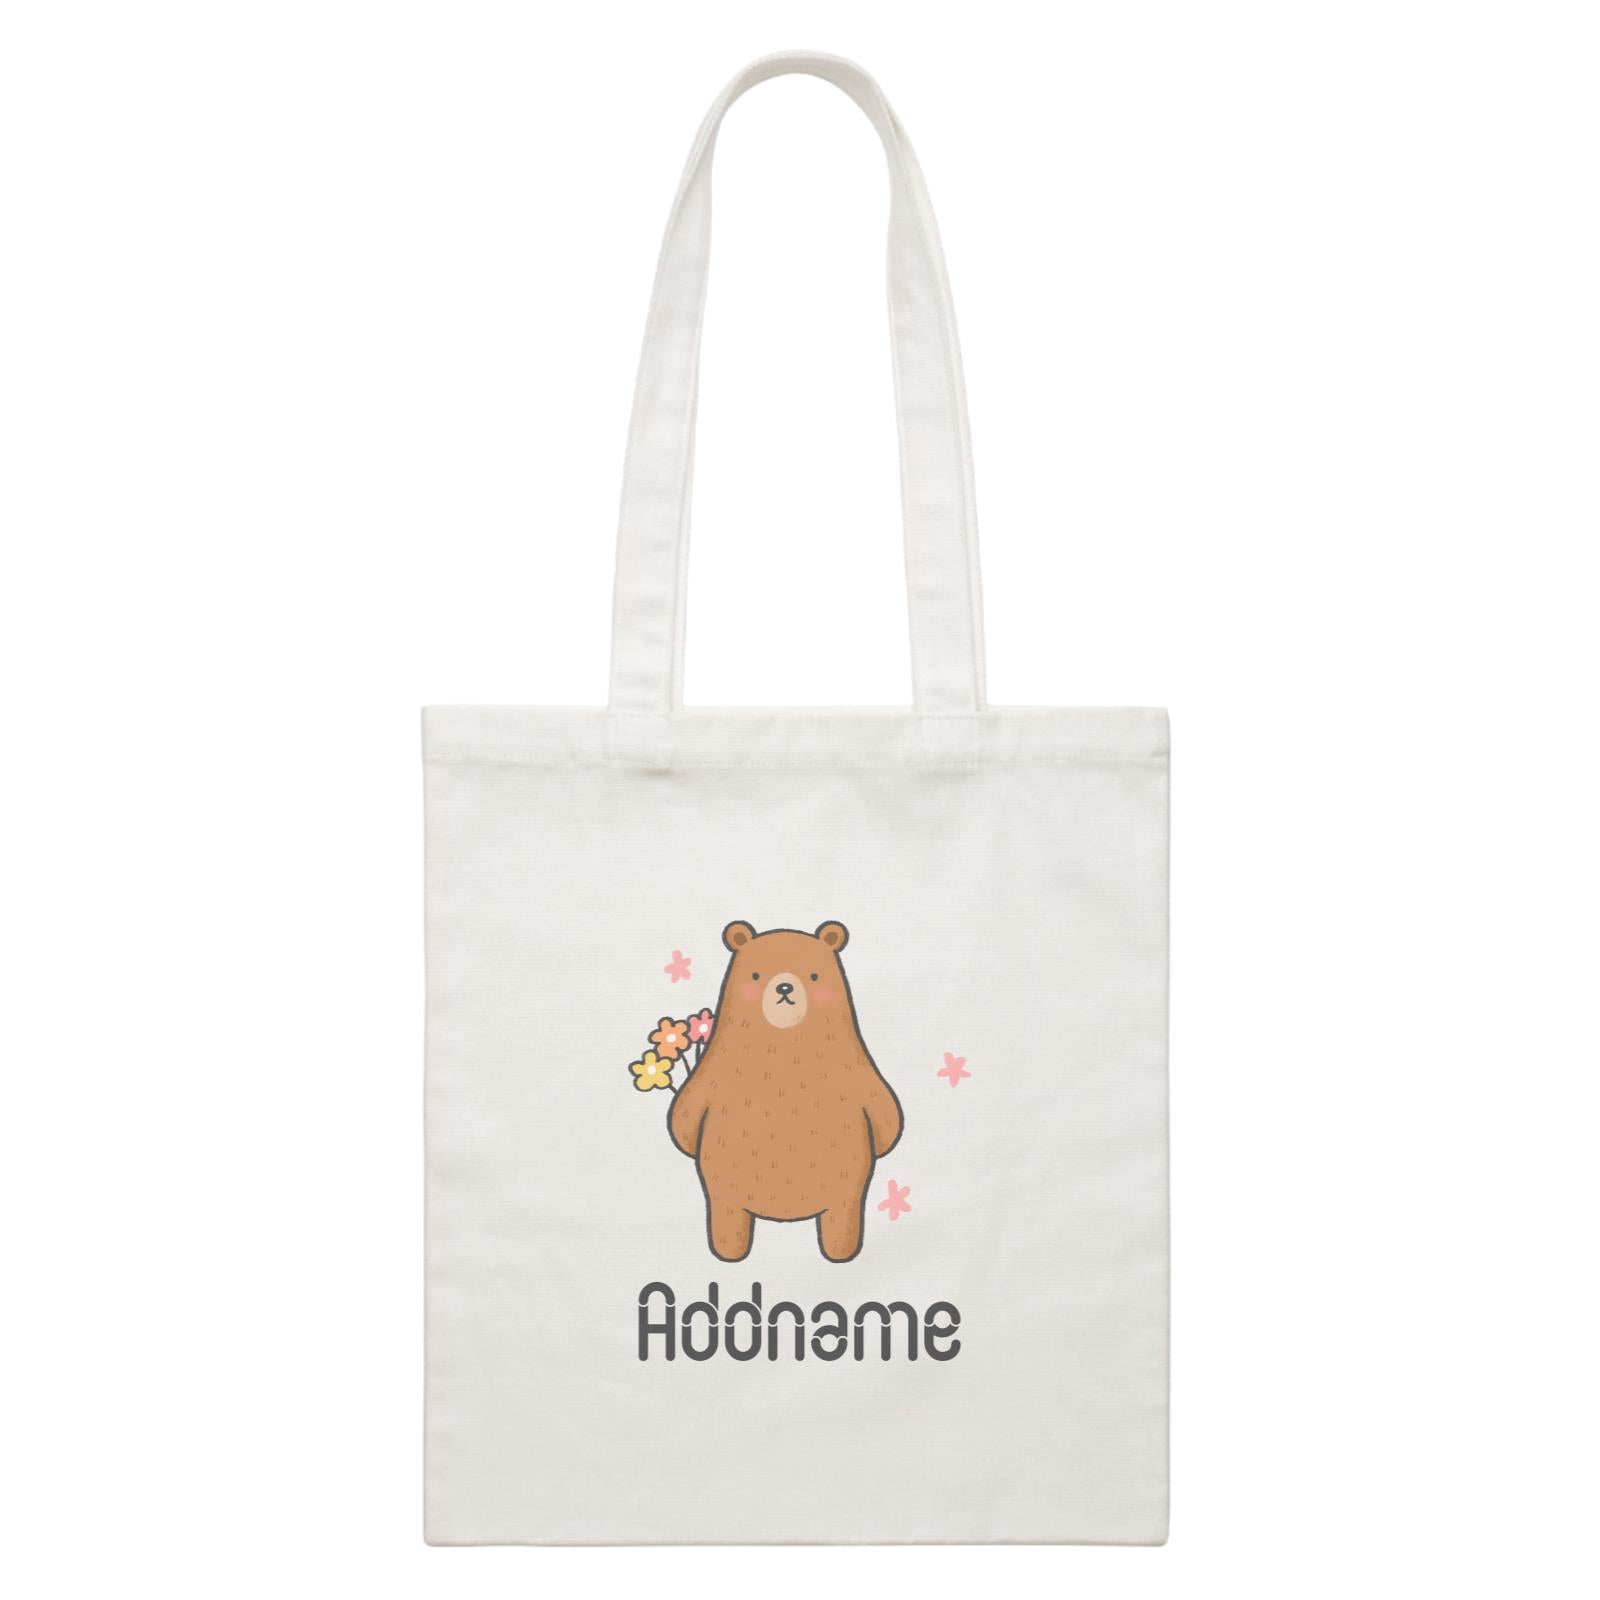 Cute Hand Drawn Style Bear with Flowers Addname White Canvas Bag